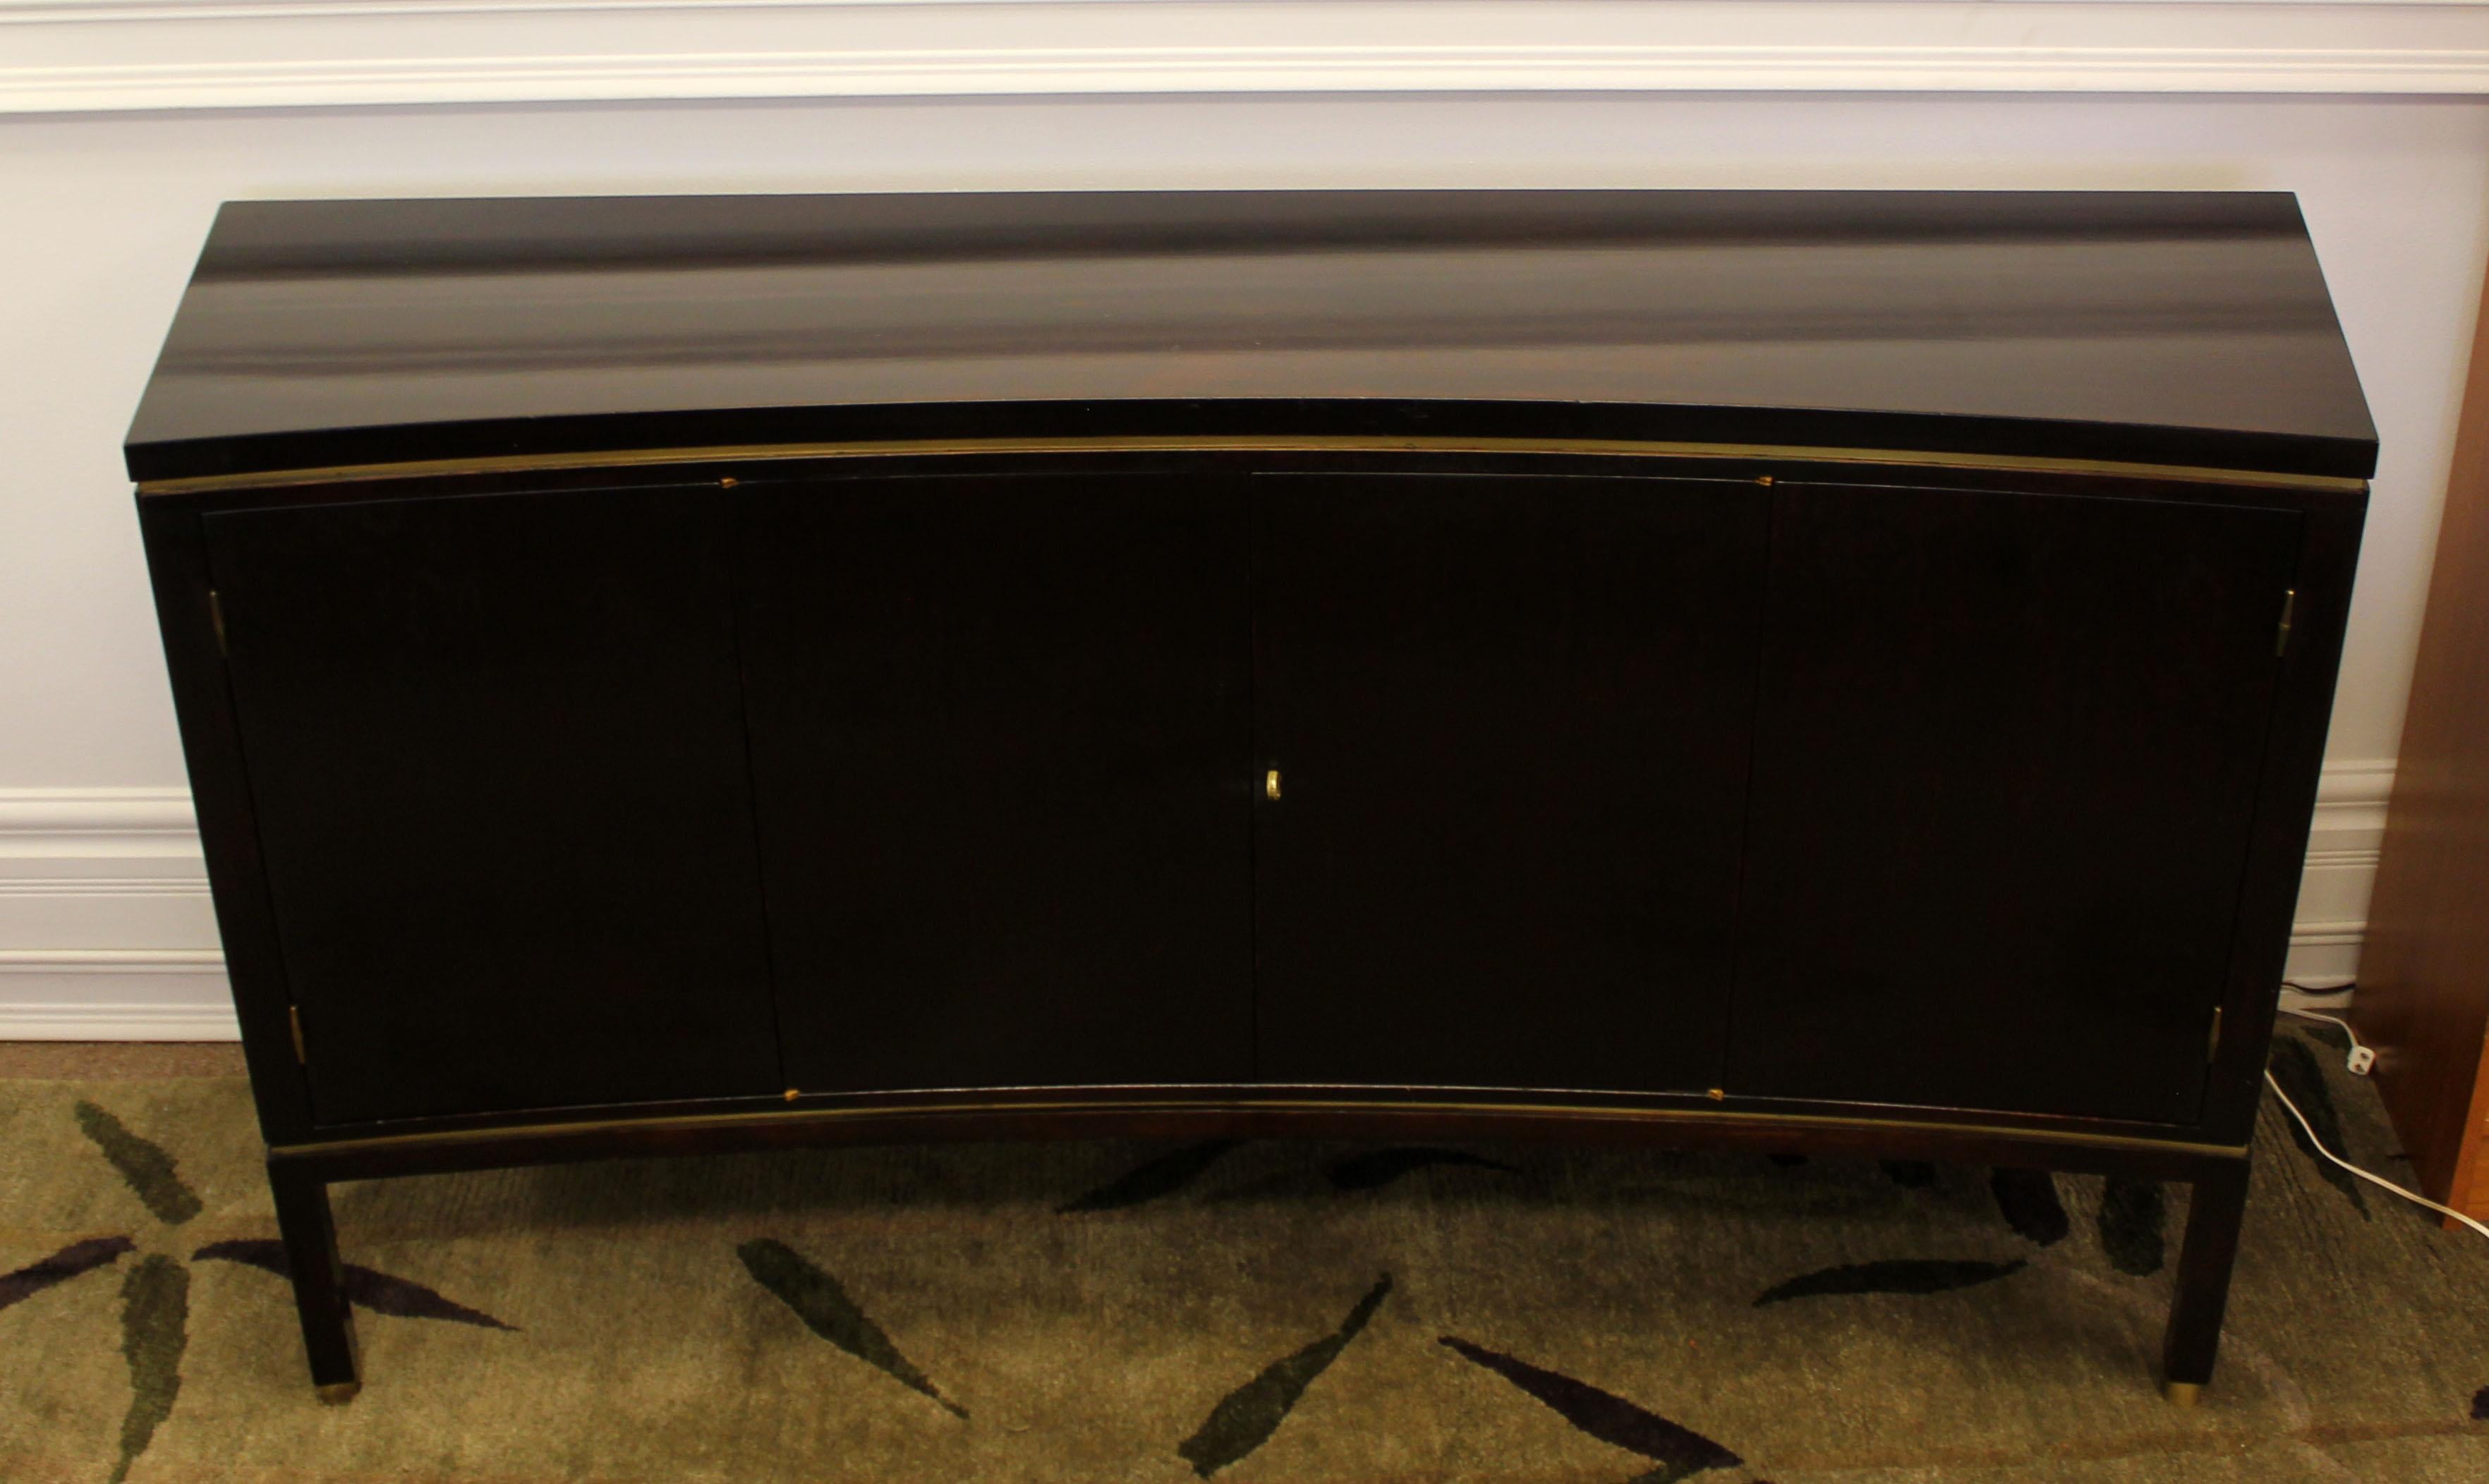 For your consideration is a rare and fantastic, curved front credenza, made of mahogany wood with brass accents, with three shelves and a compartmentalized drawer for silverware, by Edward Wormley for Dunbar, circa the 1960s. In very good condition.